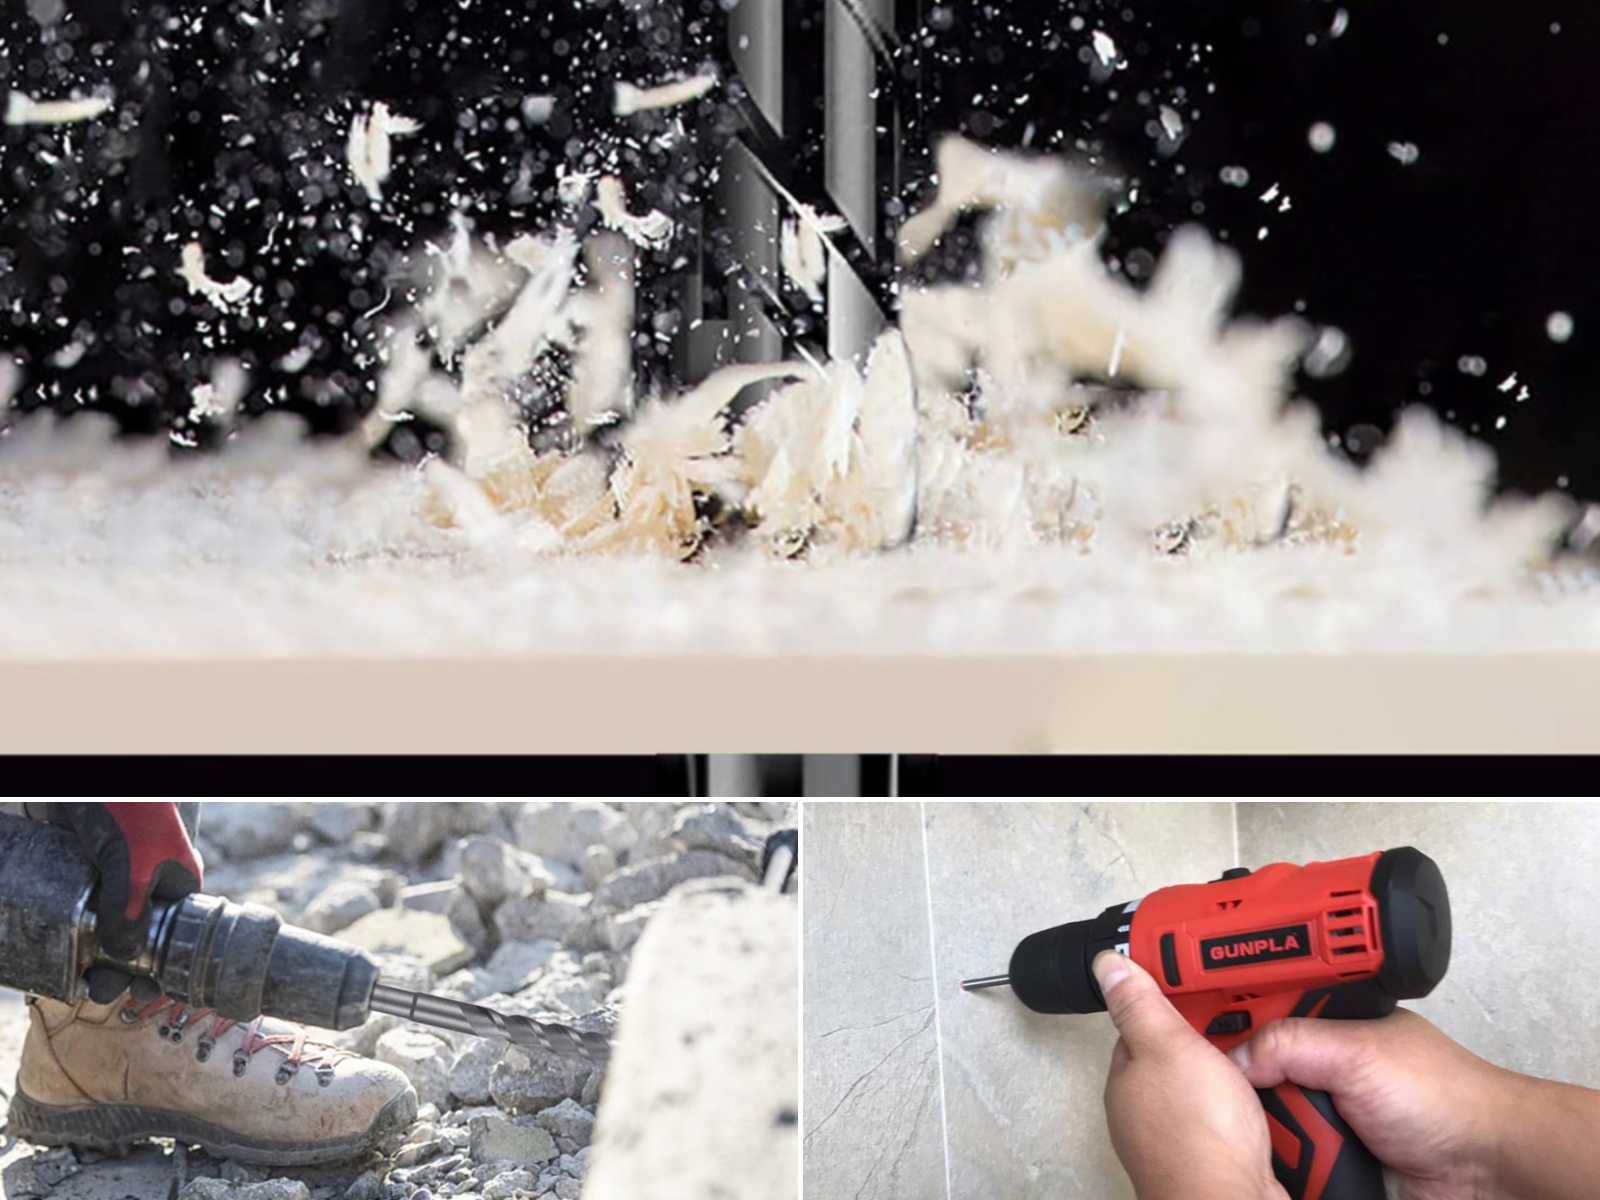 Masonry bits drilling marble, concrete, and tile.